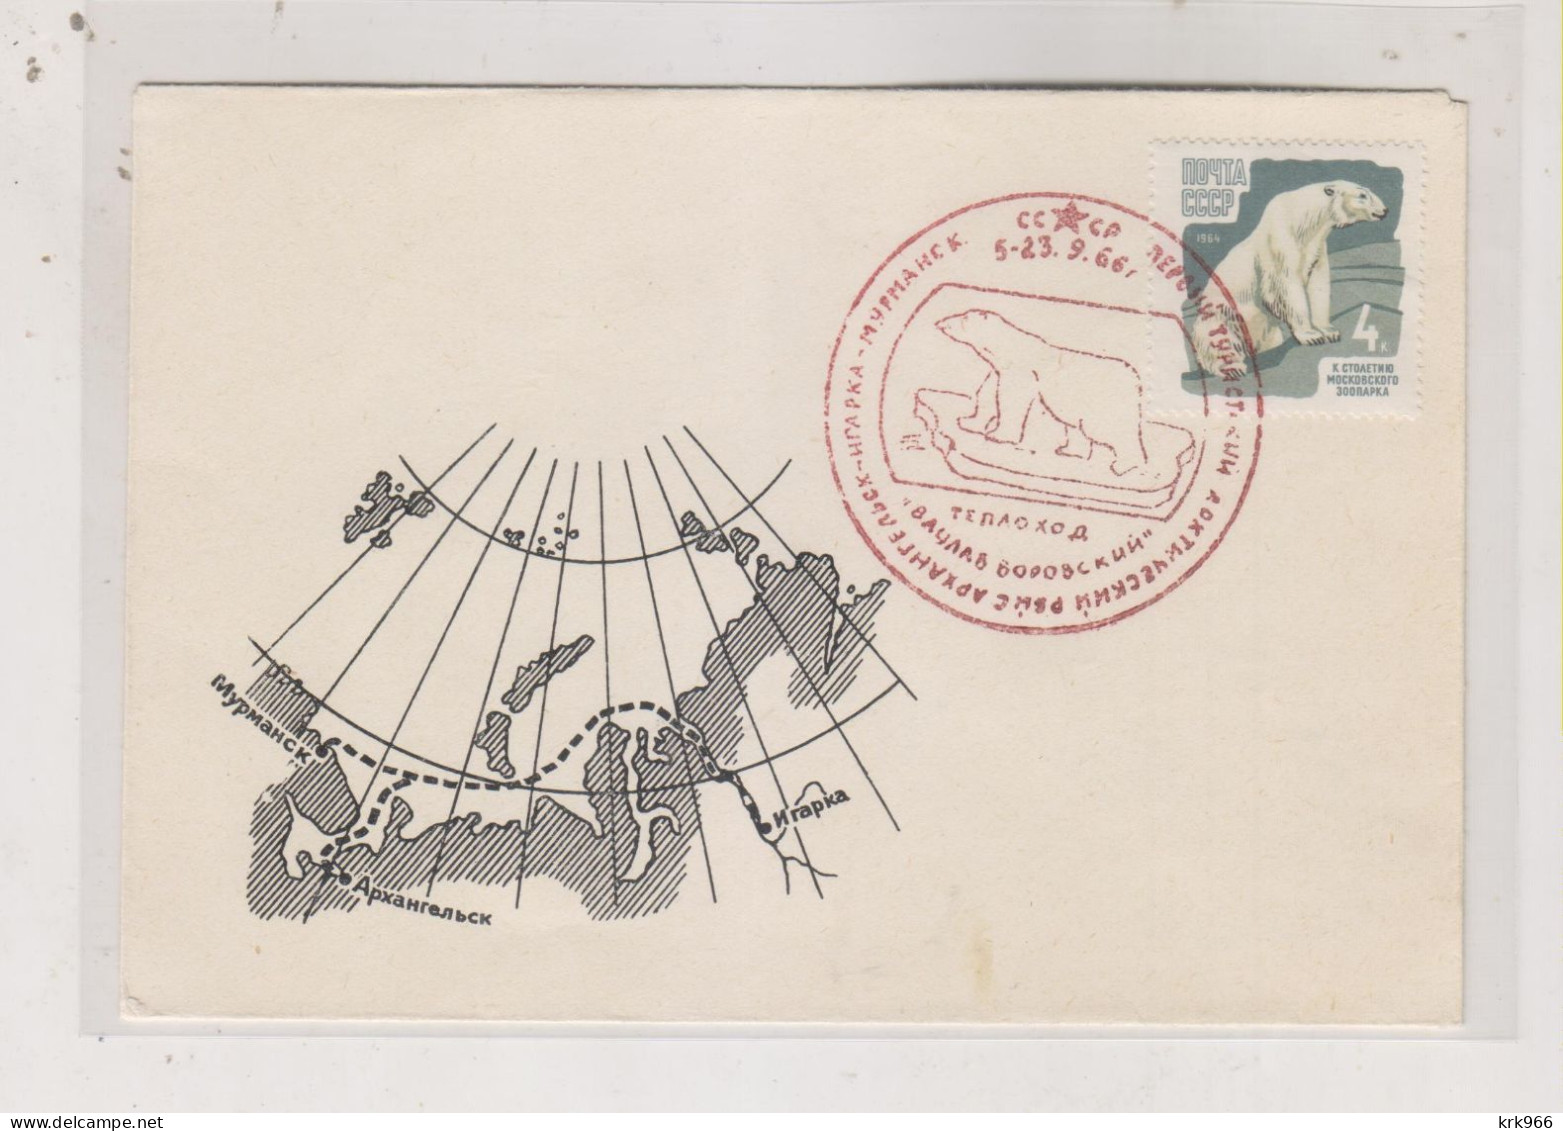 RUSSIA, 1966 Nice Cover NORTH POLE - Covers & Documents